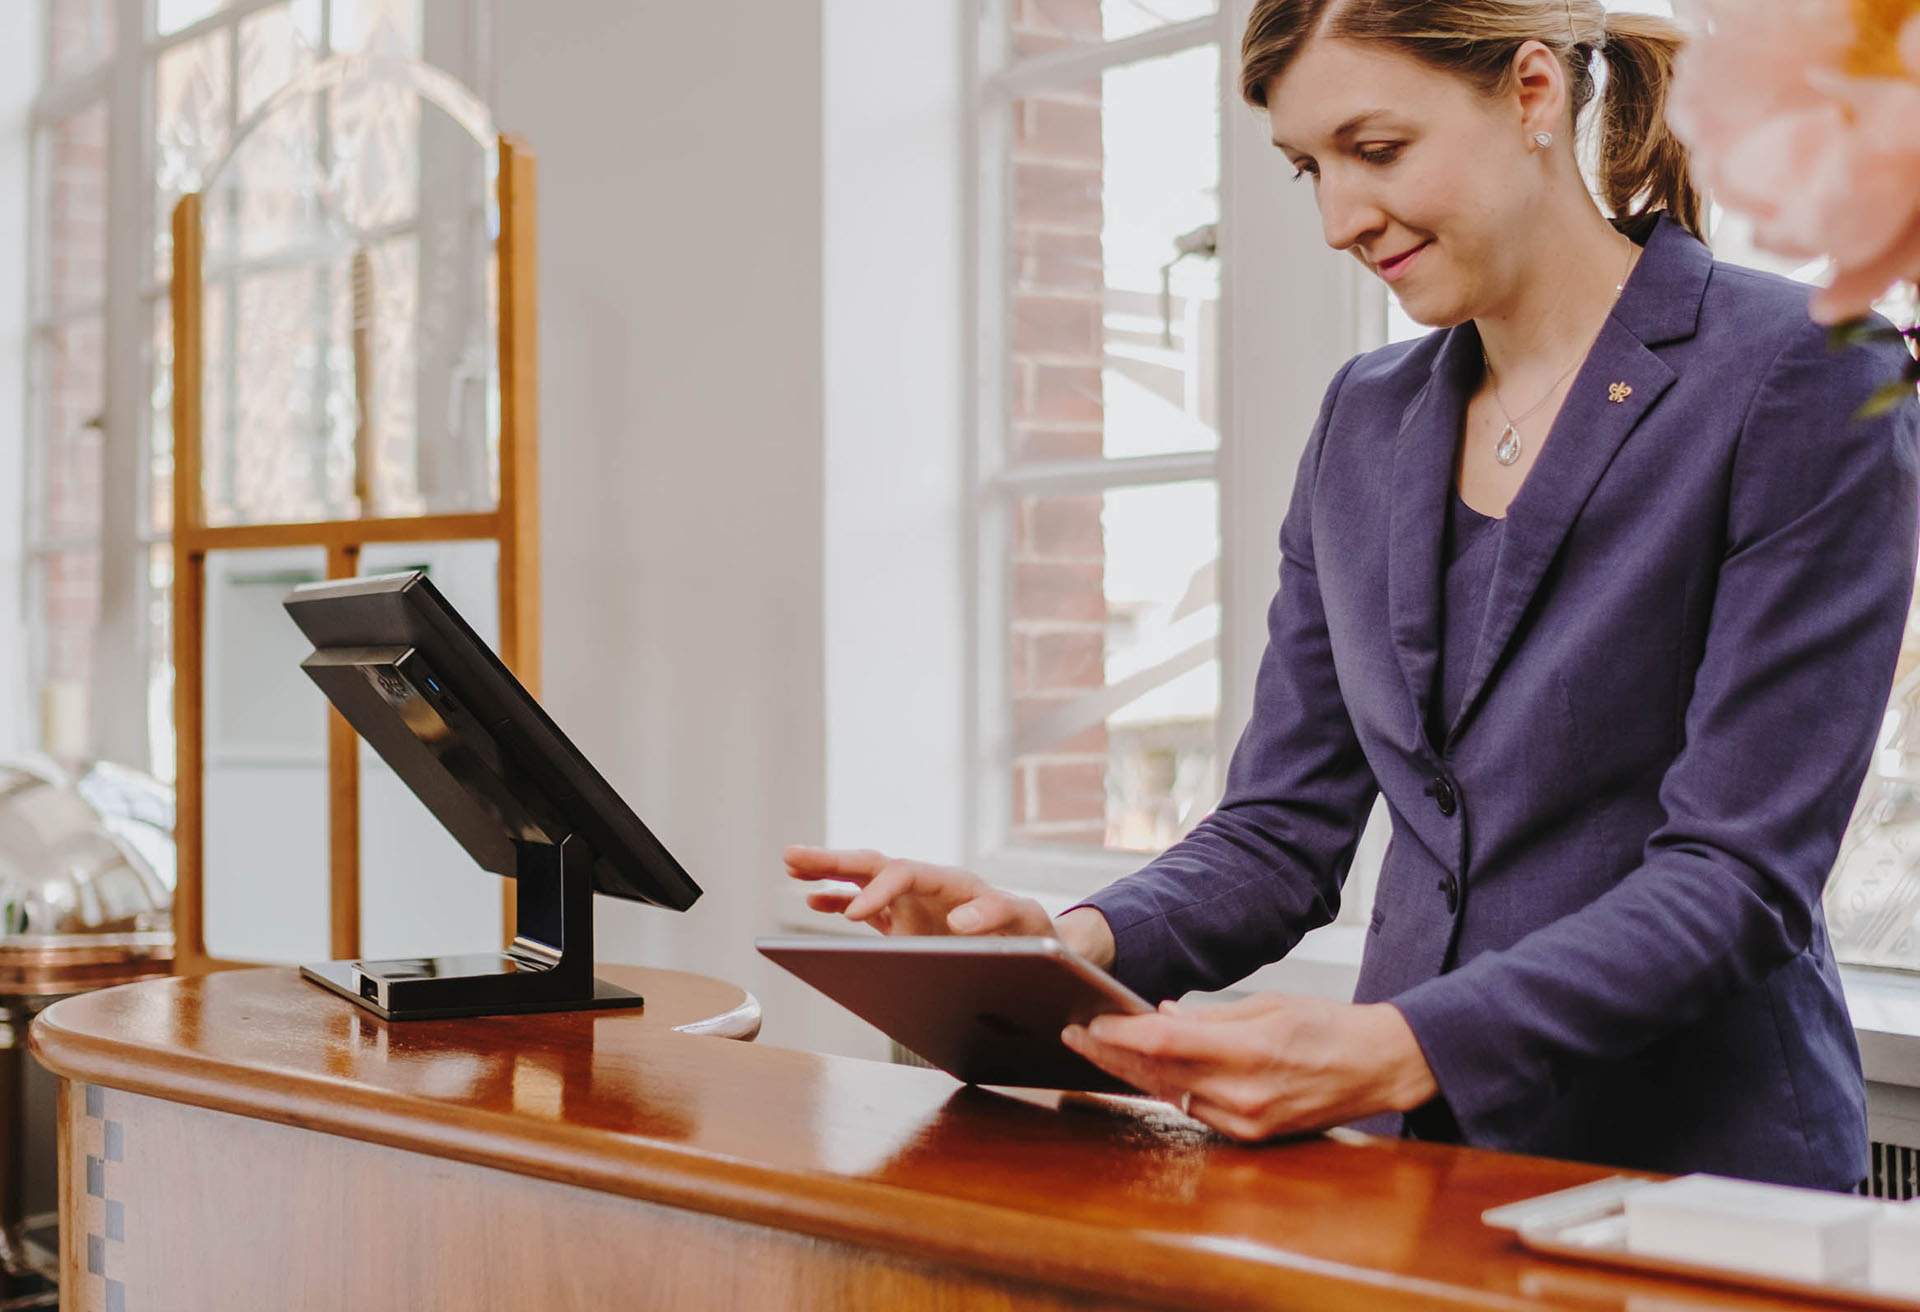 A woman is depicted while working at front desk stand, holding a table in her hands